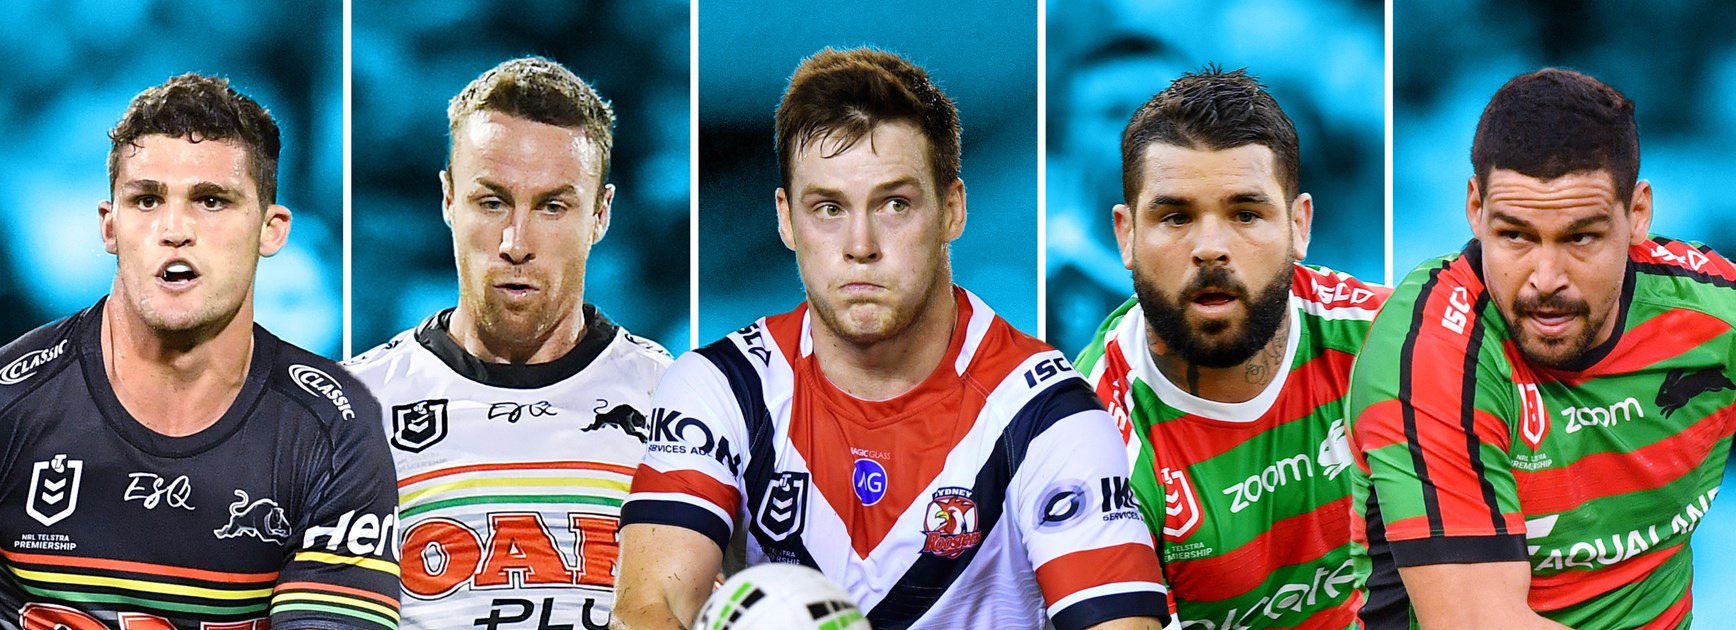 NSW Blues halves: NRL.com experts have their say